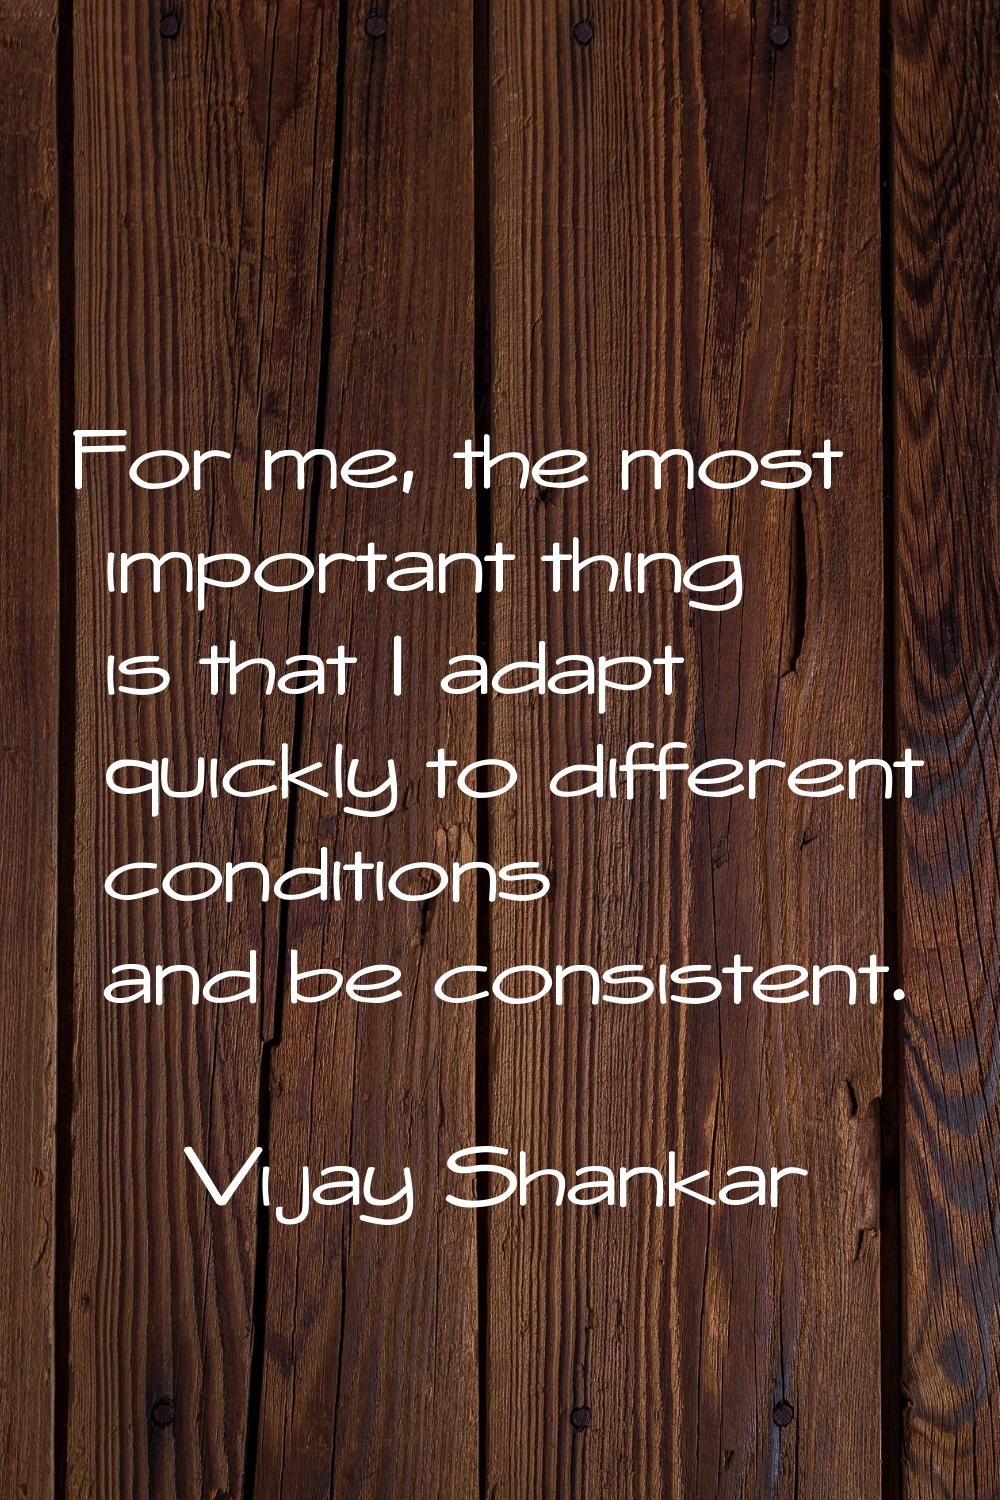 For me, the most important thing is that I adapt quickly to different conditions and be consistent.